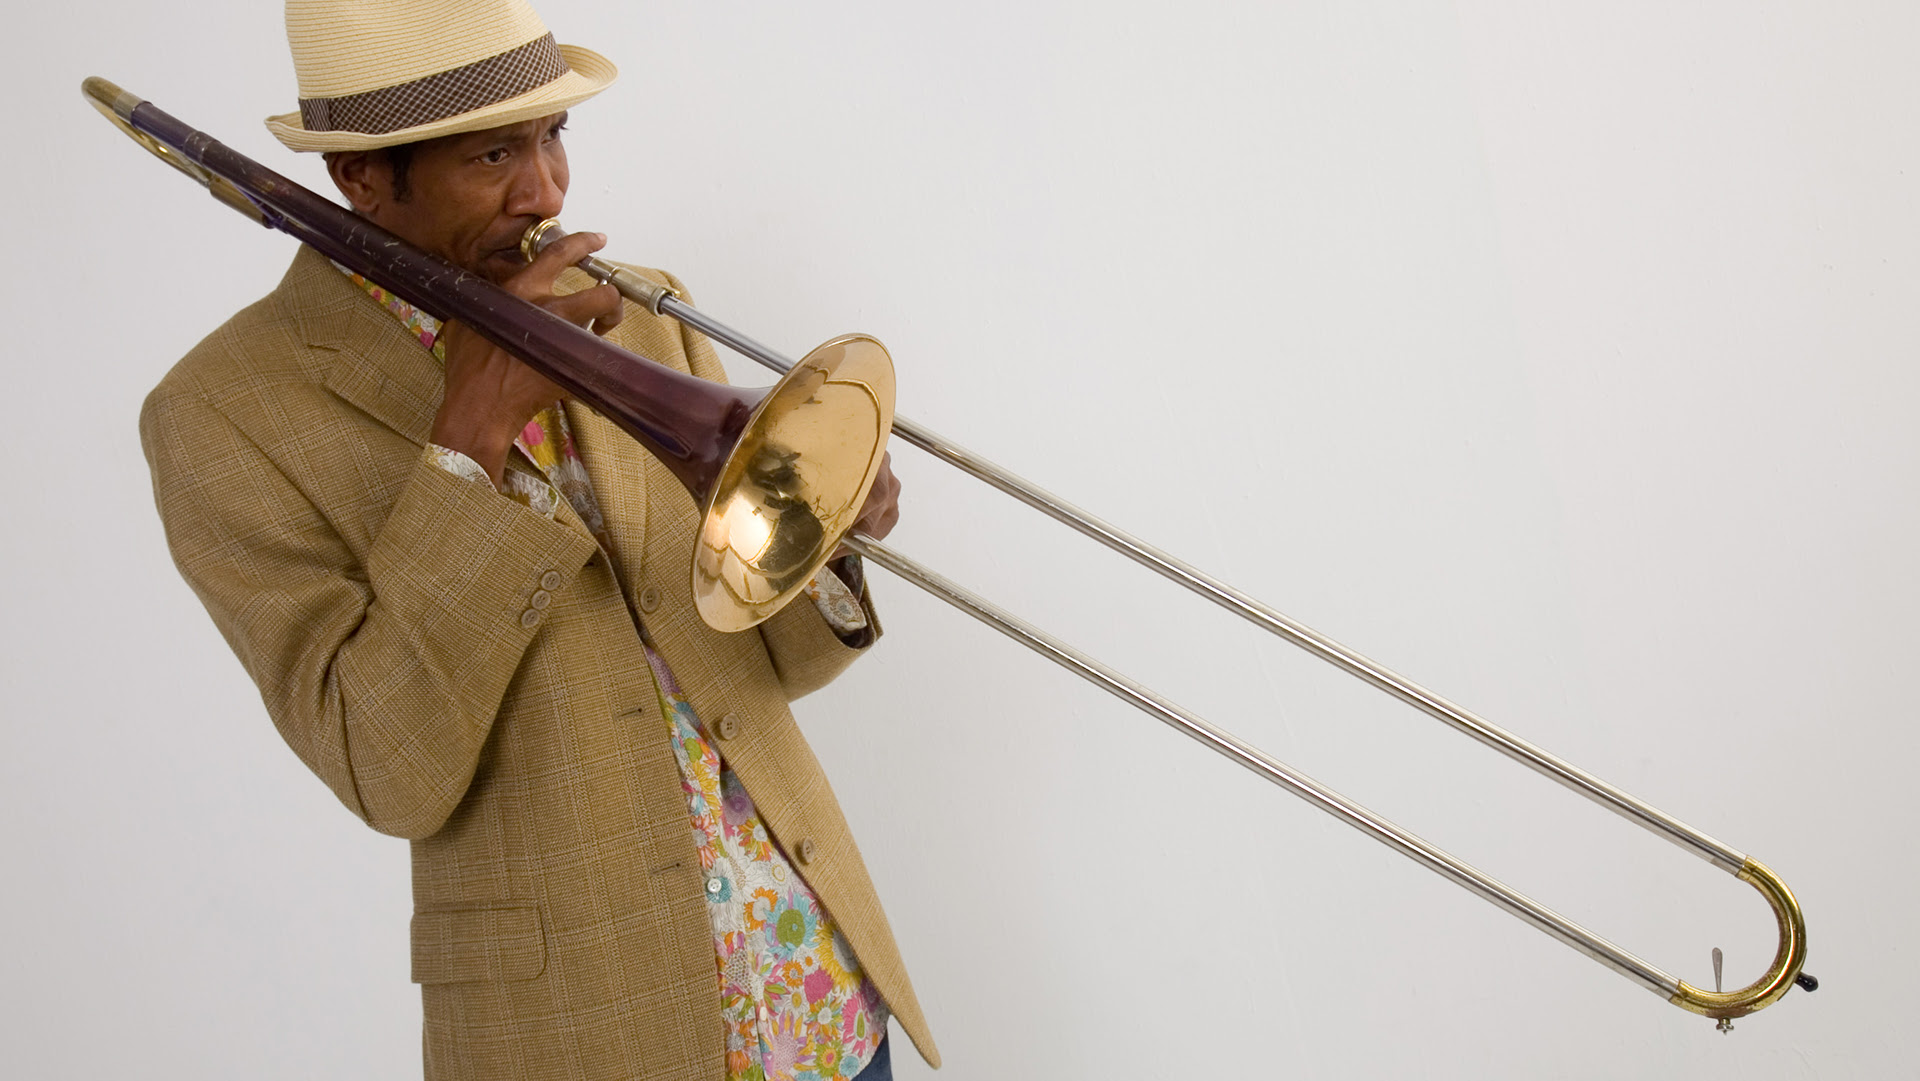 A man wearing a straw hat and linen jacket playing the trombone